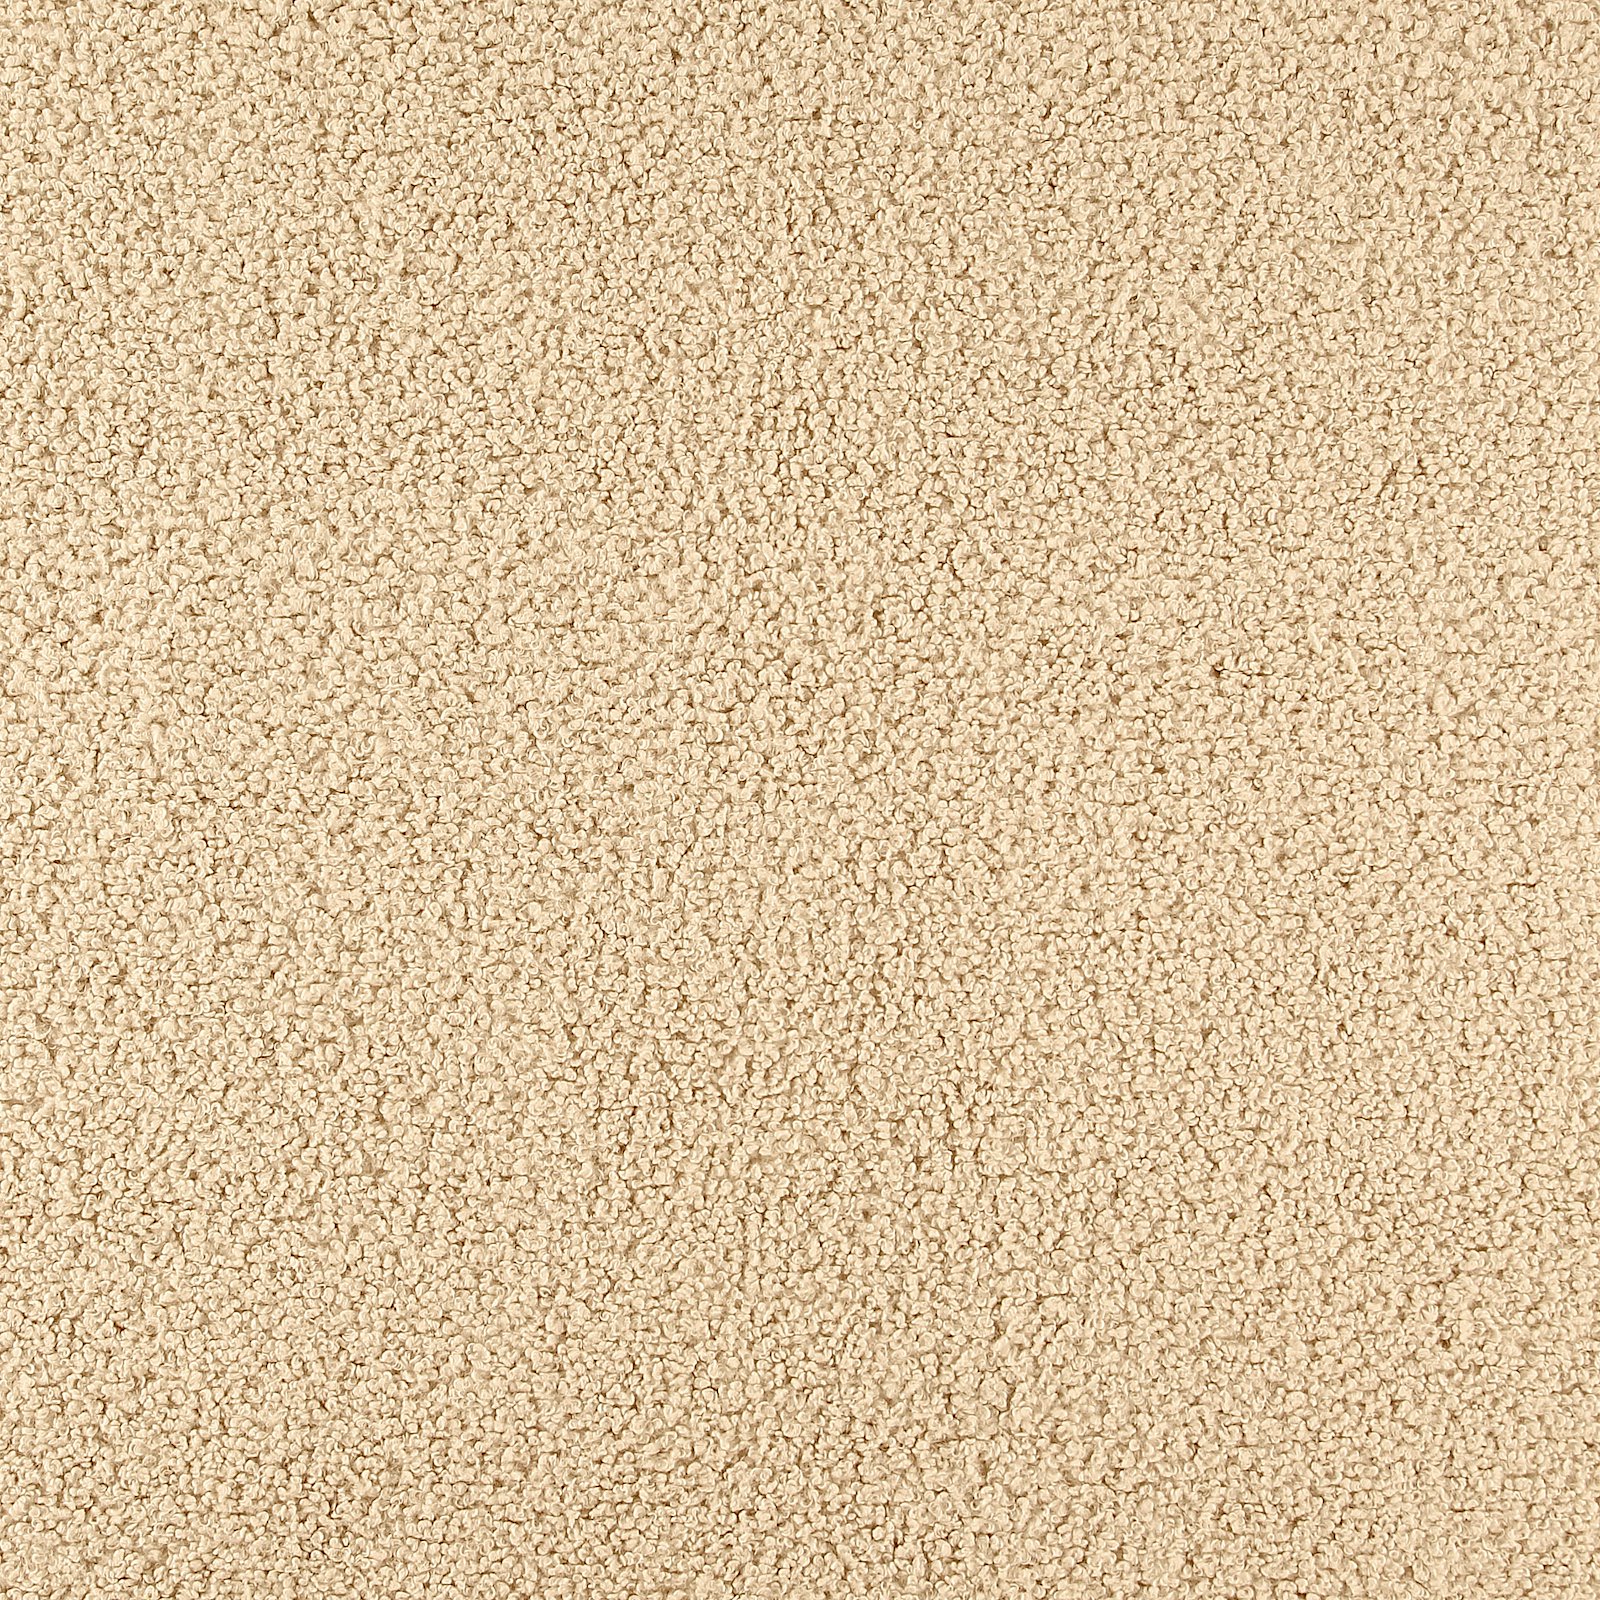 Møbelteddy fluffy m/backing beige 910316_pack_solid